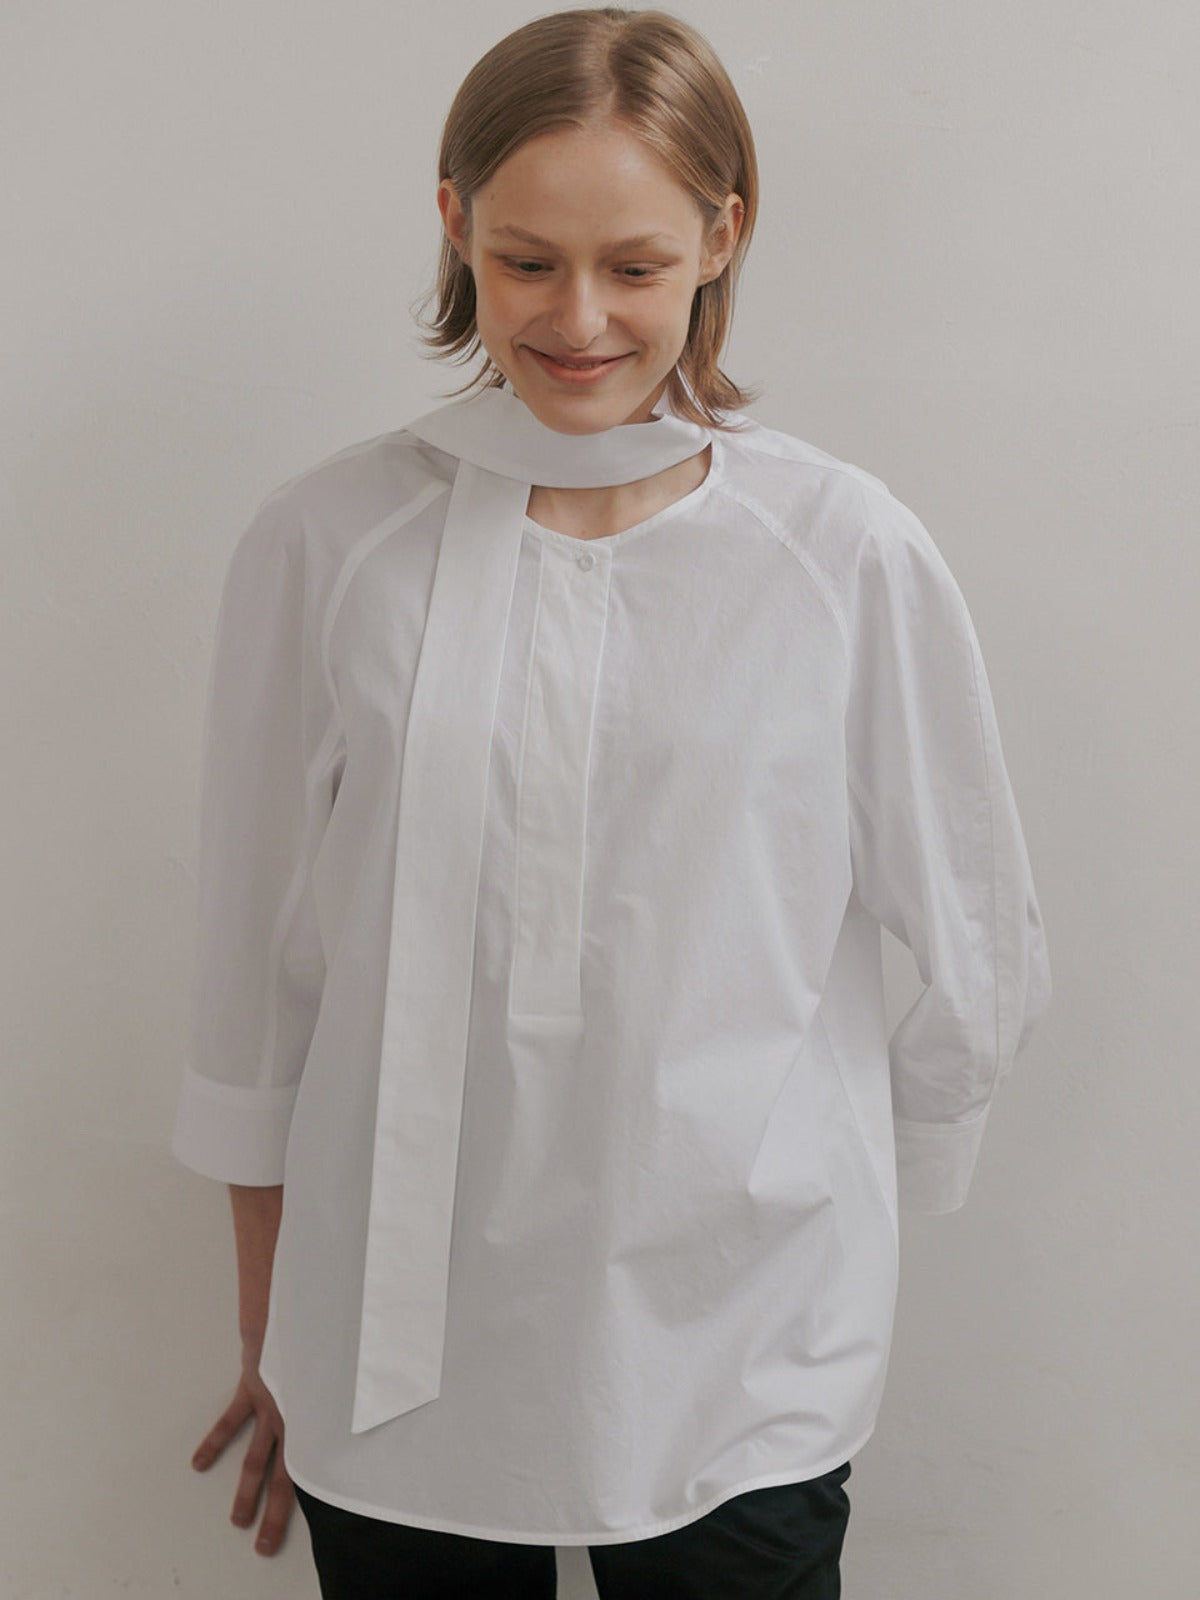 Cotton Tie Shirt Blouse In Off White